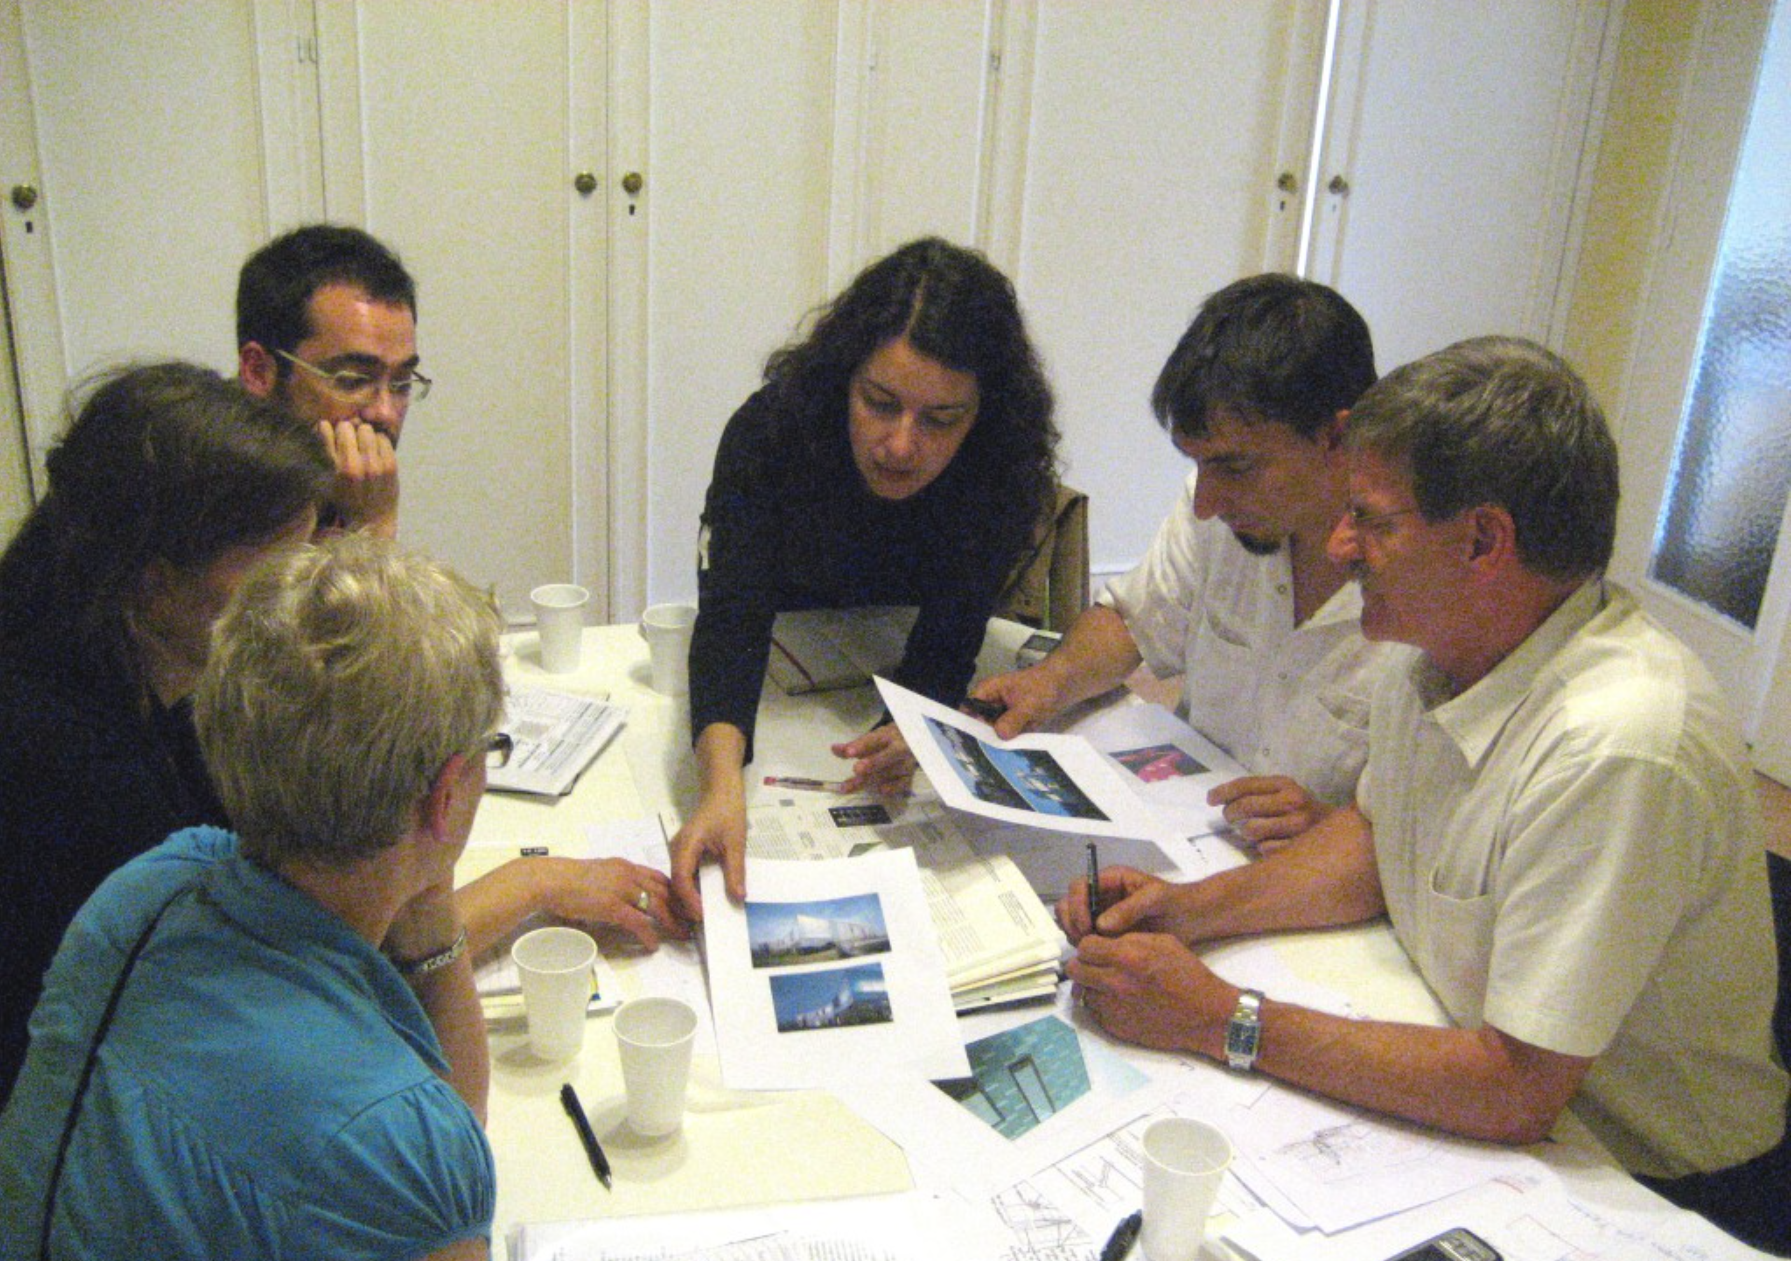 The team discussing with the client